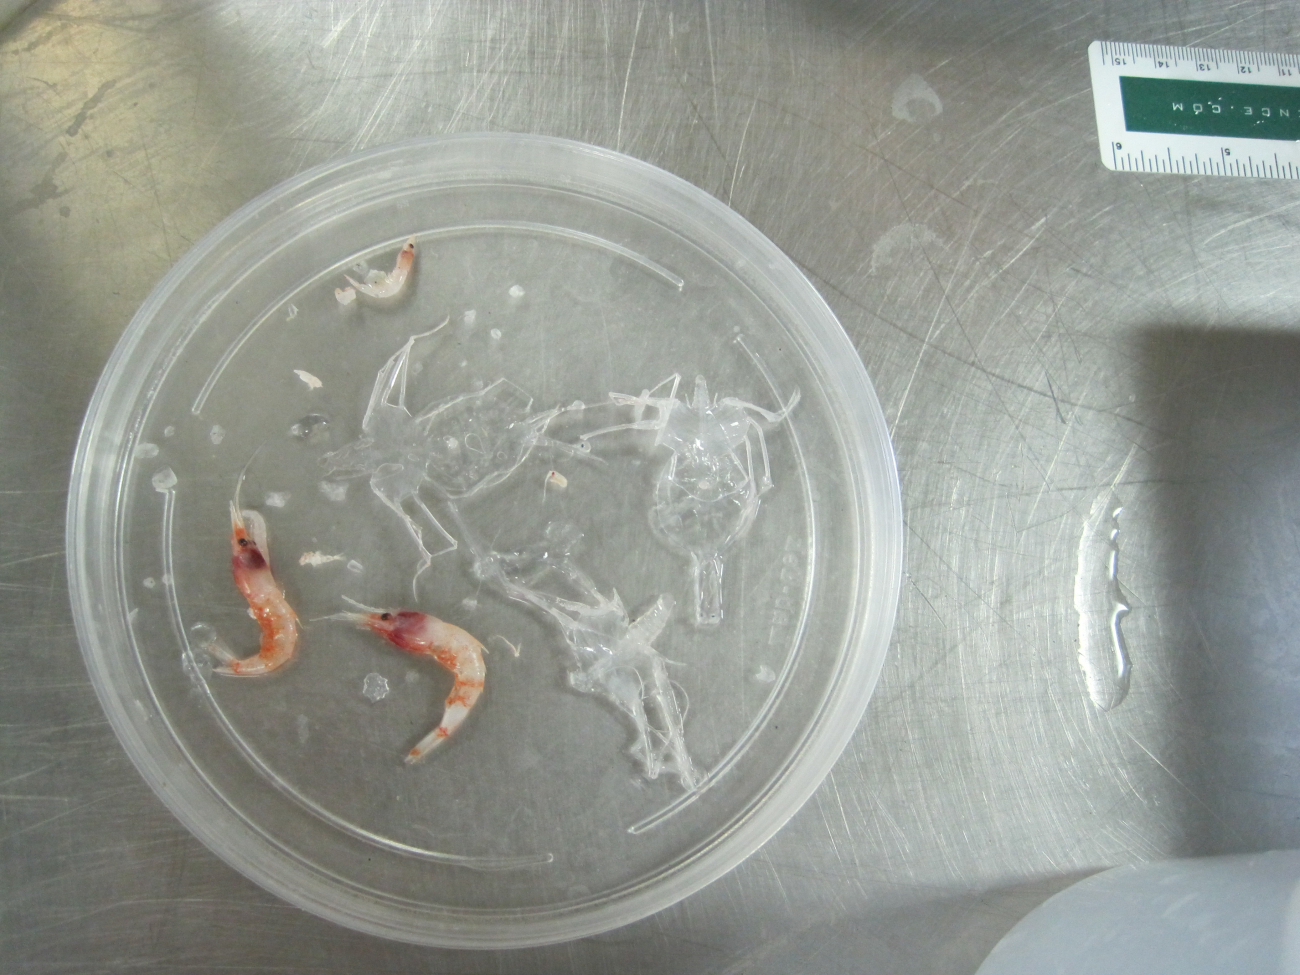 Shrimp and lobster larvae caught in plankton tow